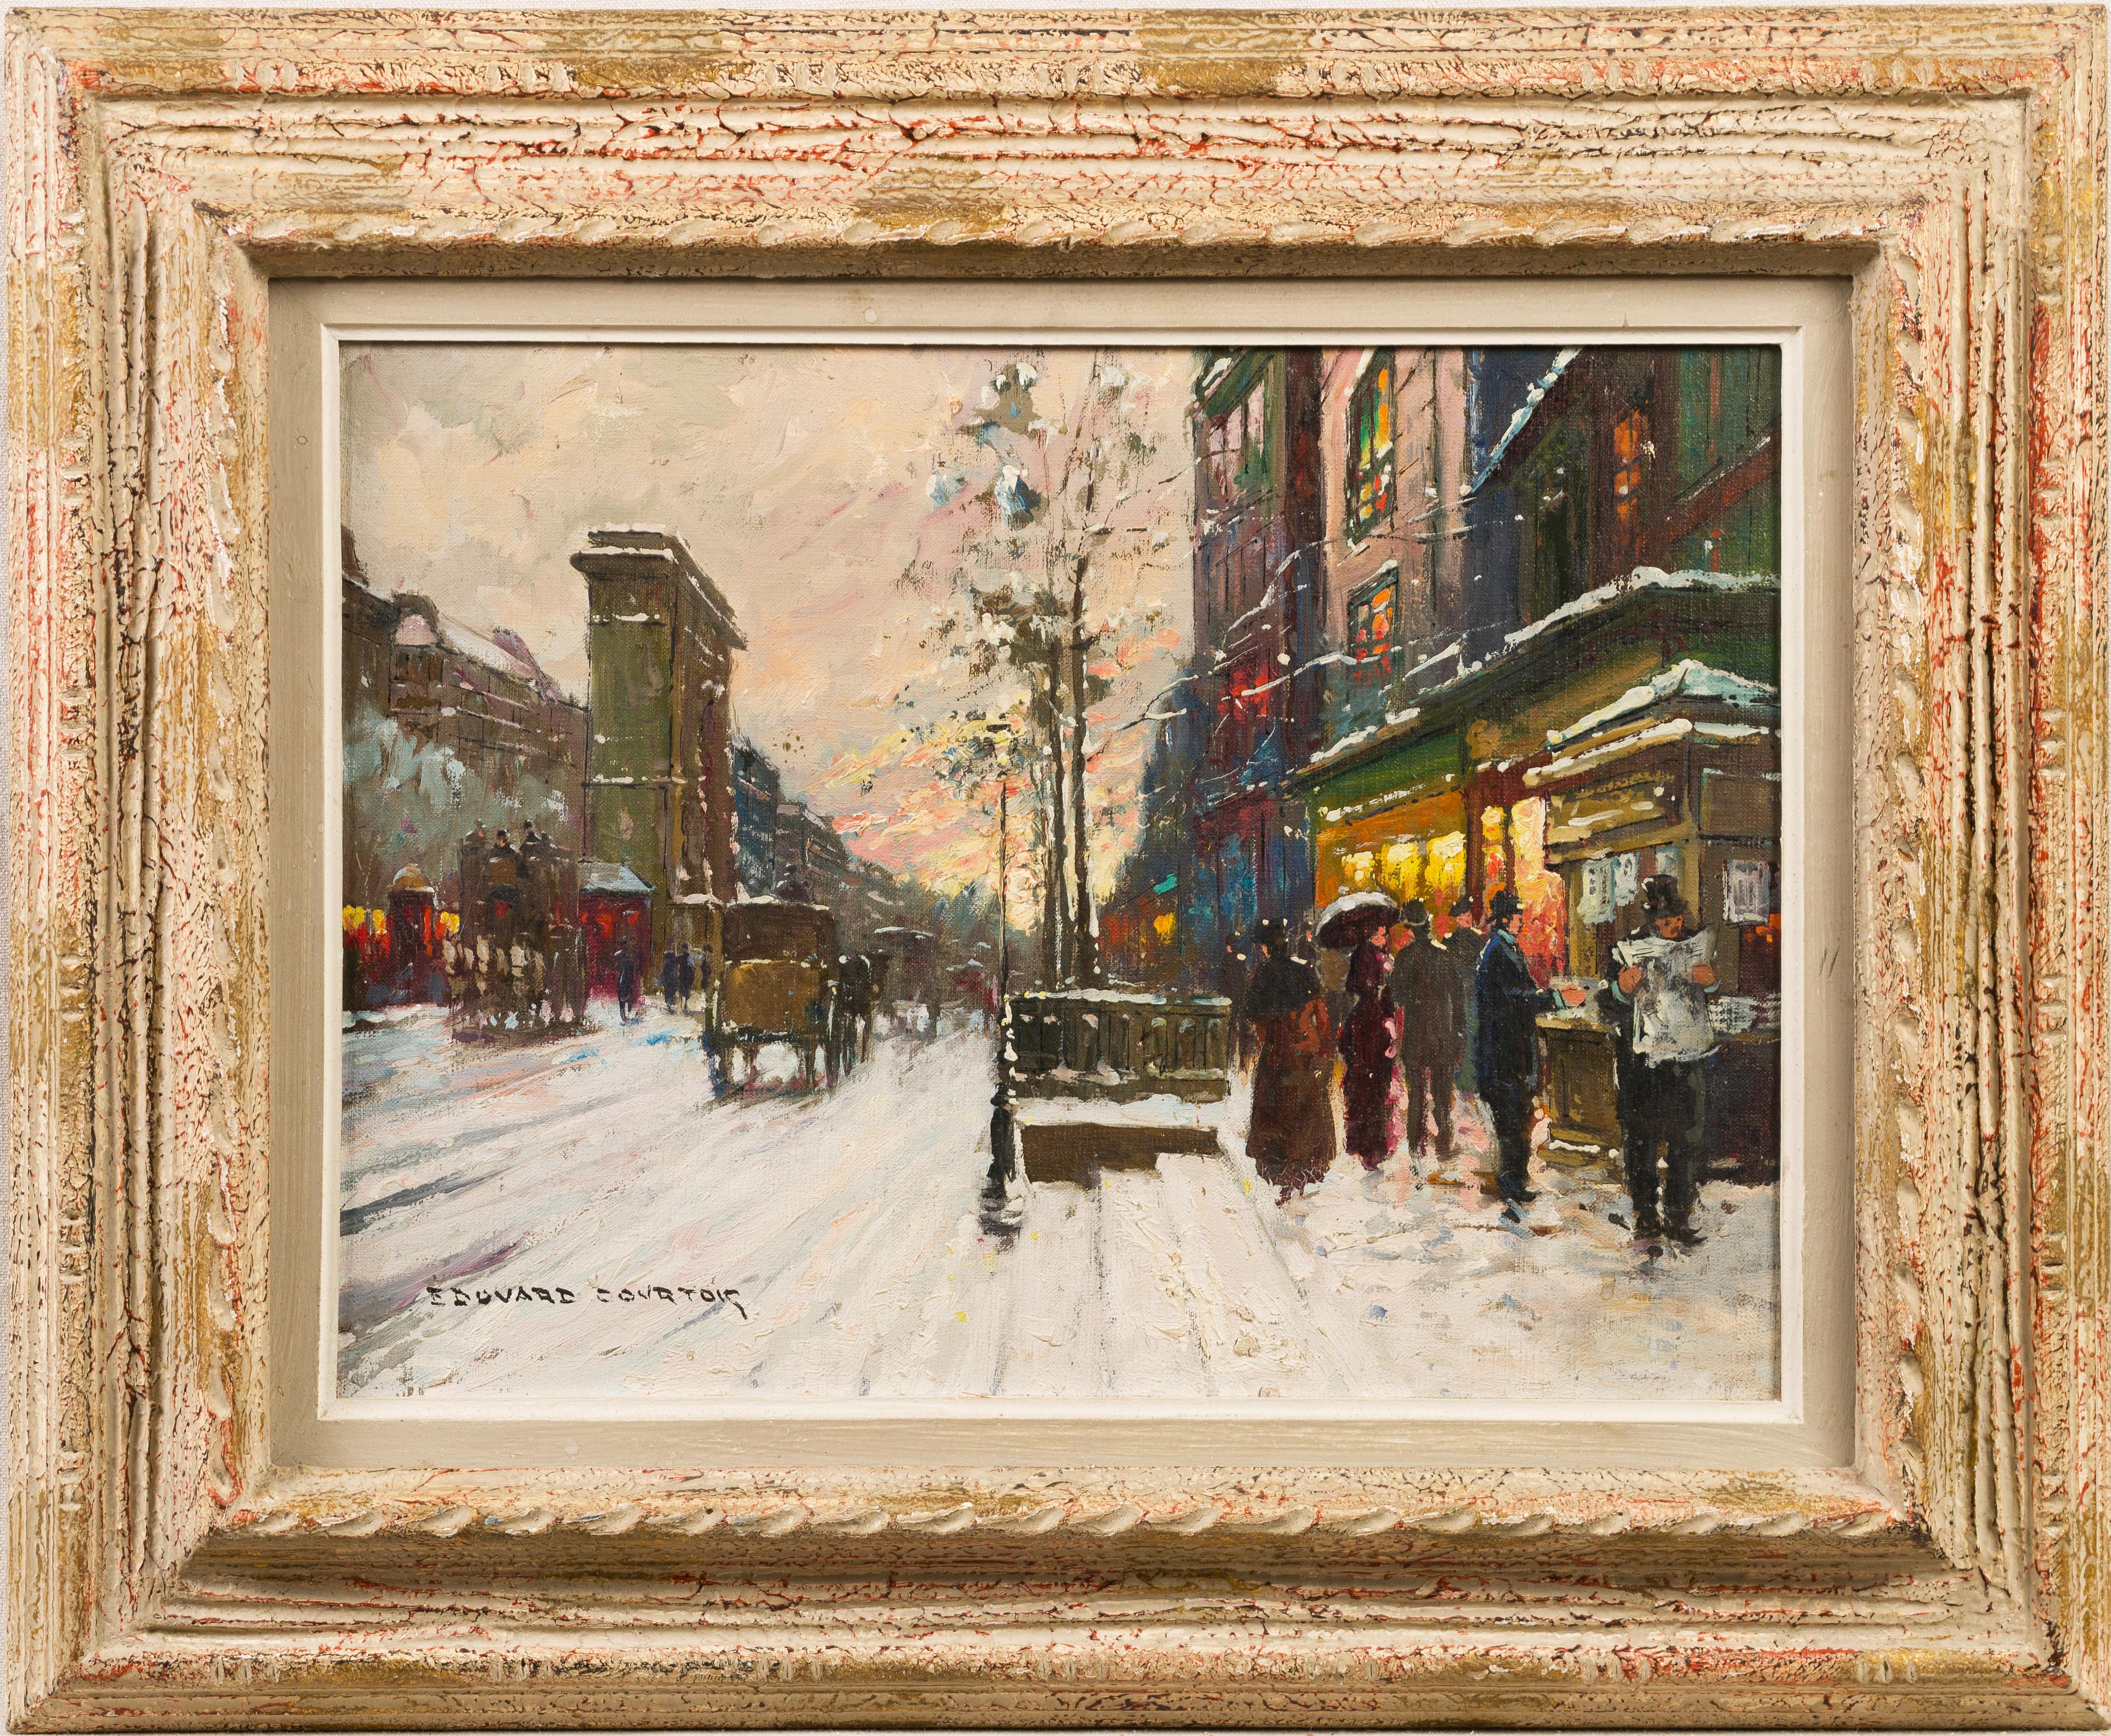 Antique French impressionist street scene landsape oil painting.  Oil on canvas, lain to board.  Framed.  Signed.